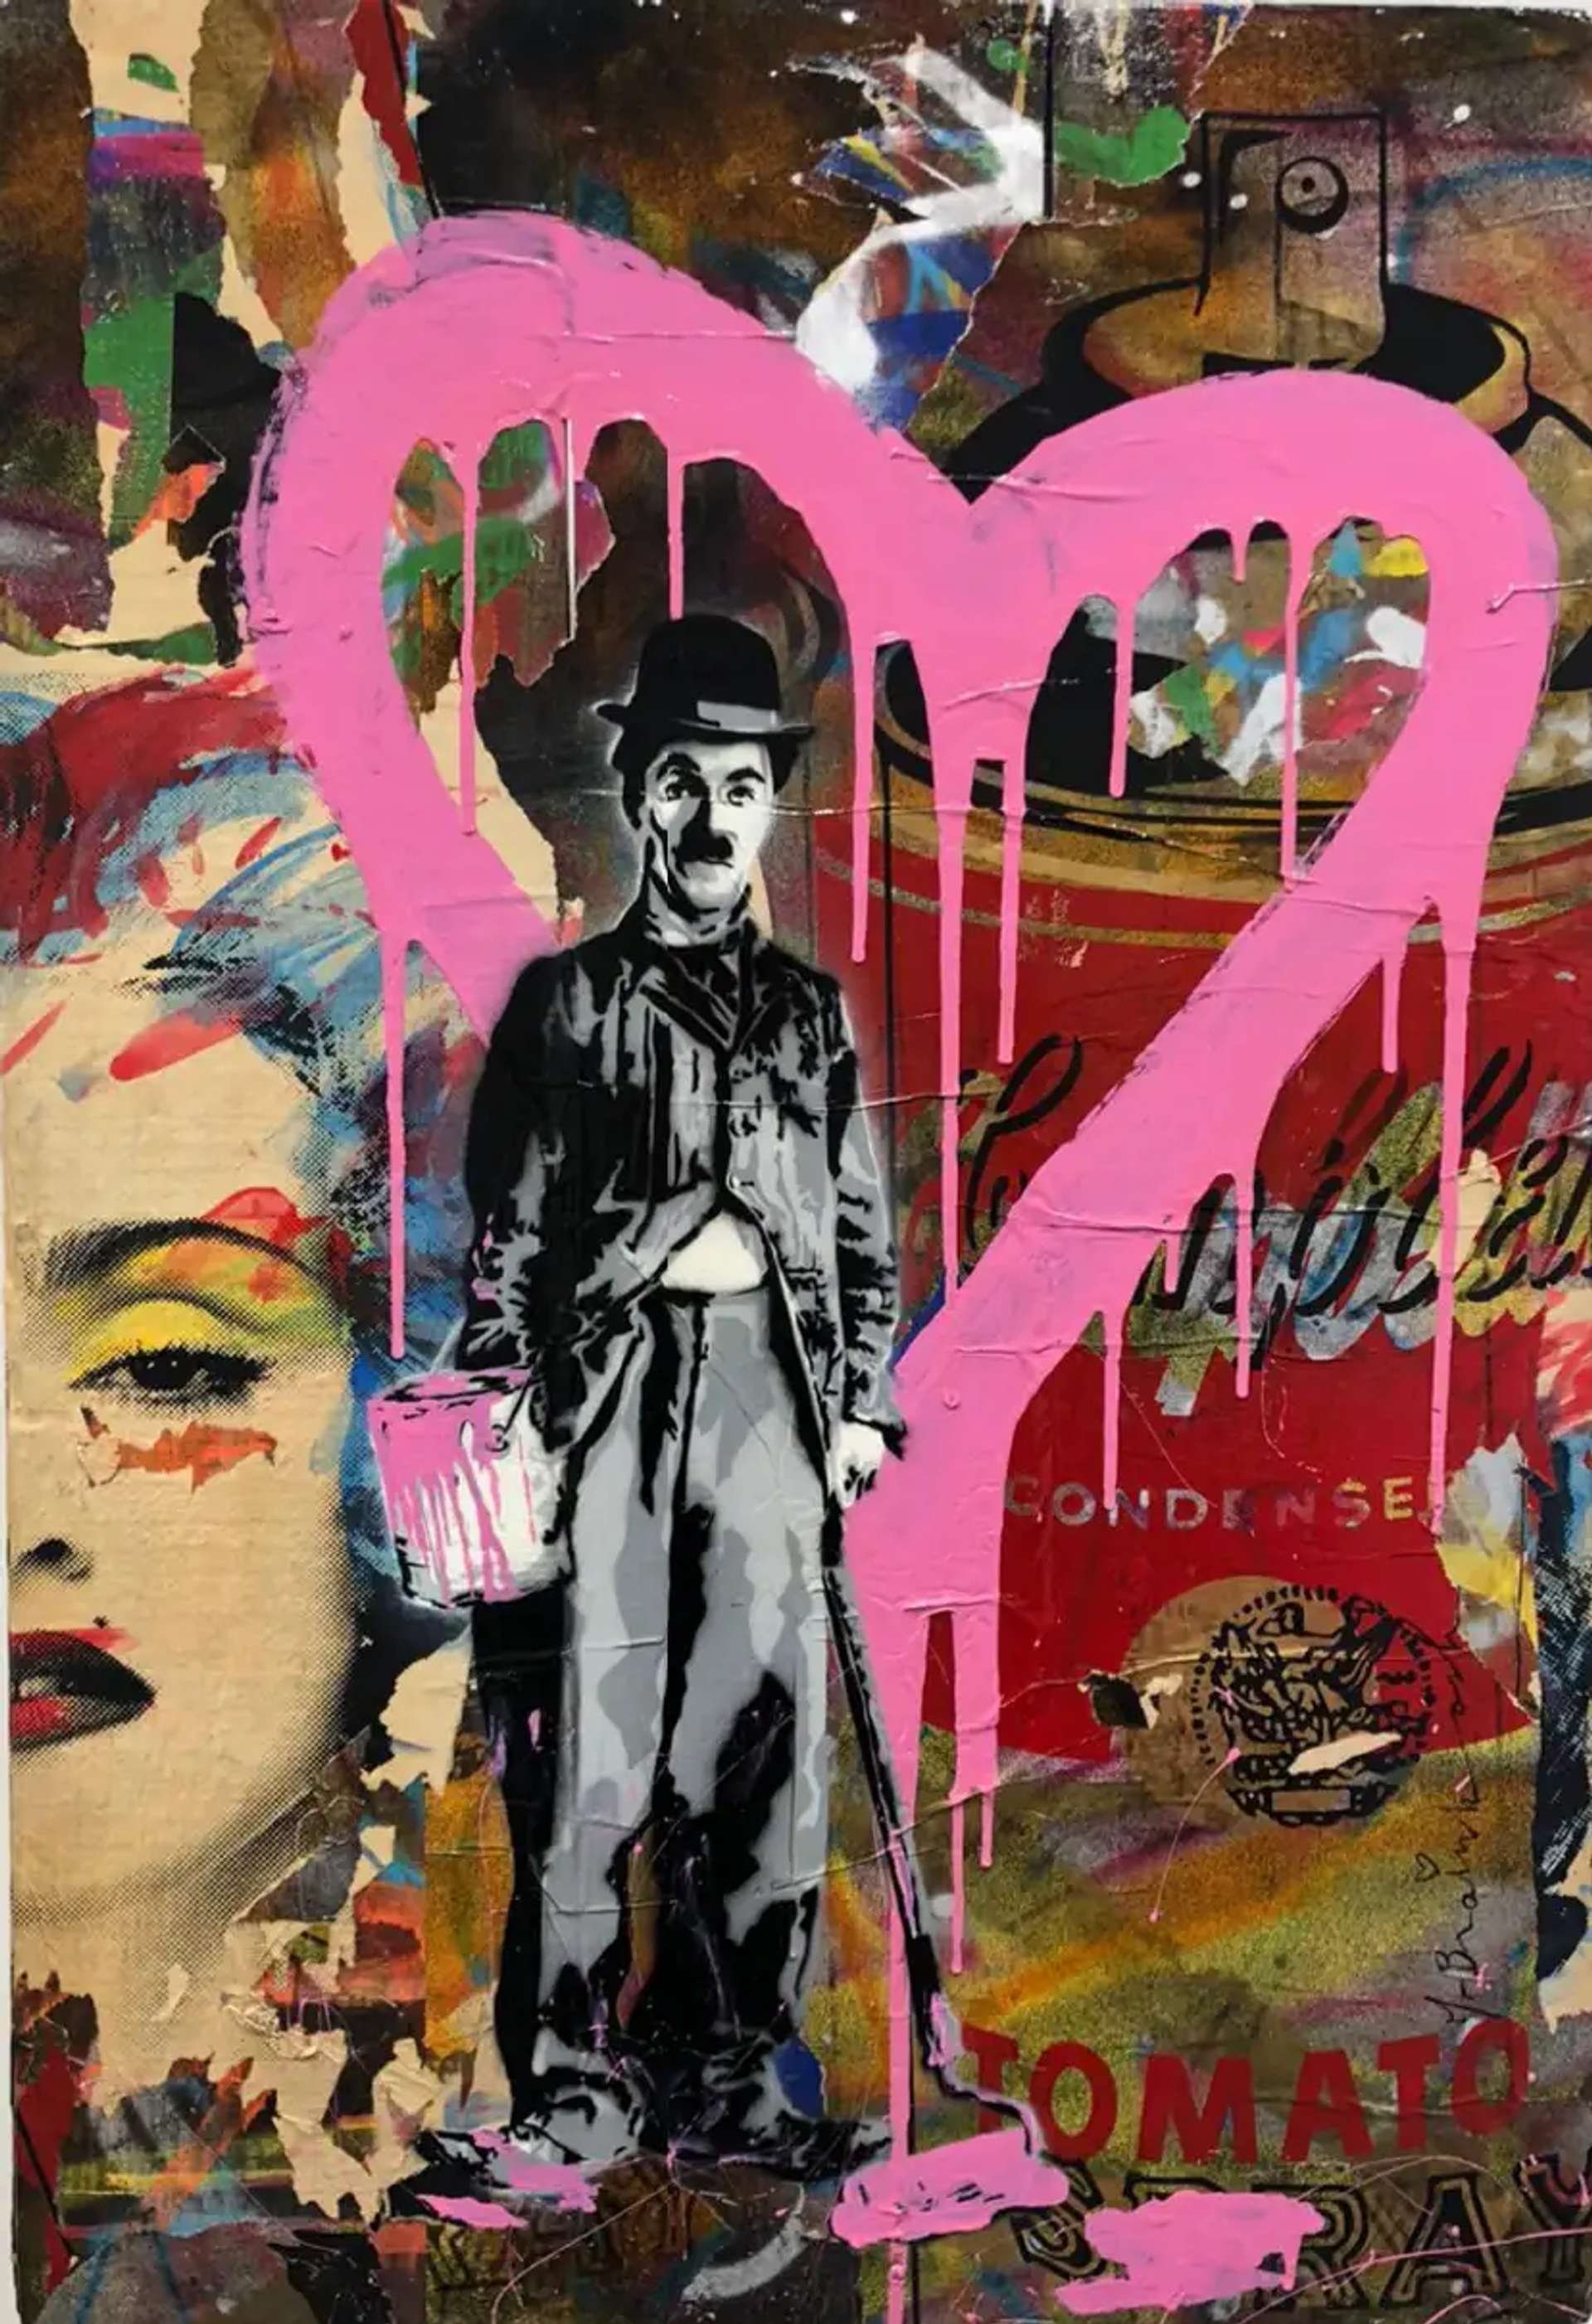 A stencilled picture of Charlie Chaplin holding an open pink paint can next to a graffiti-collaged wall with Madonna portraits, a Campbell's soup spray can, and a large, prominent pink heart outlined painted over it.